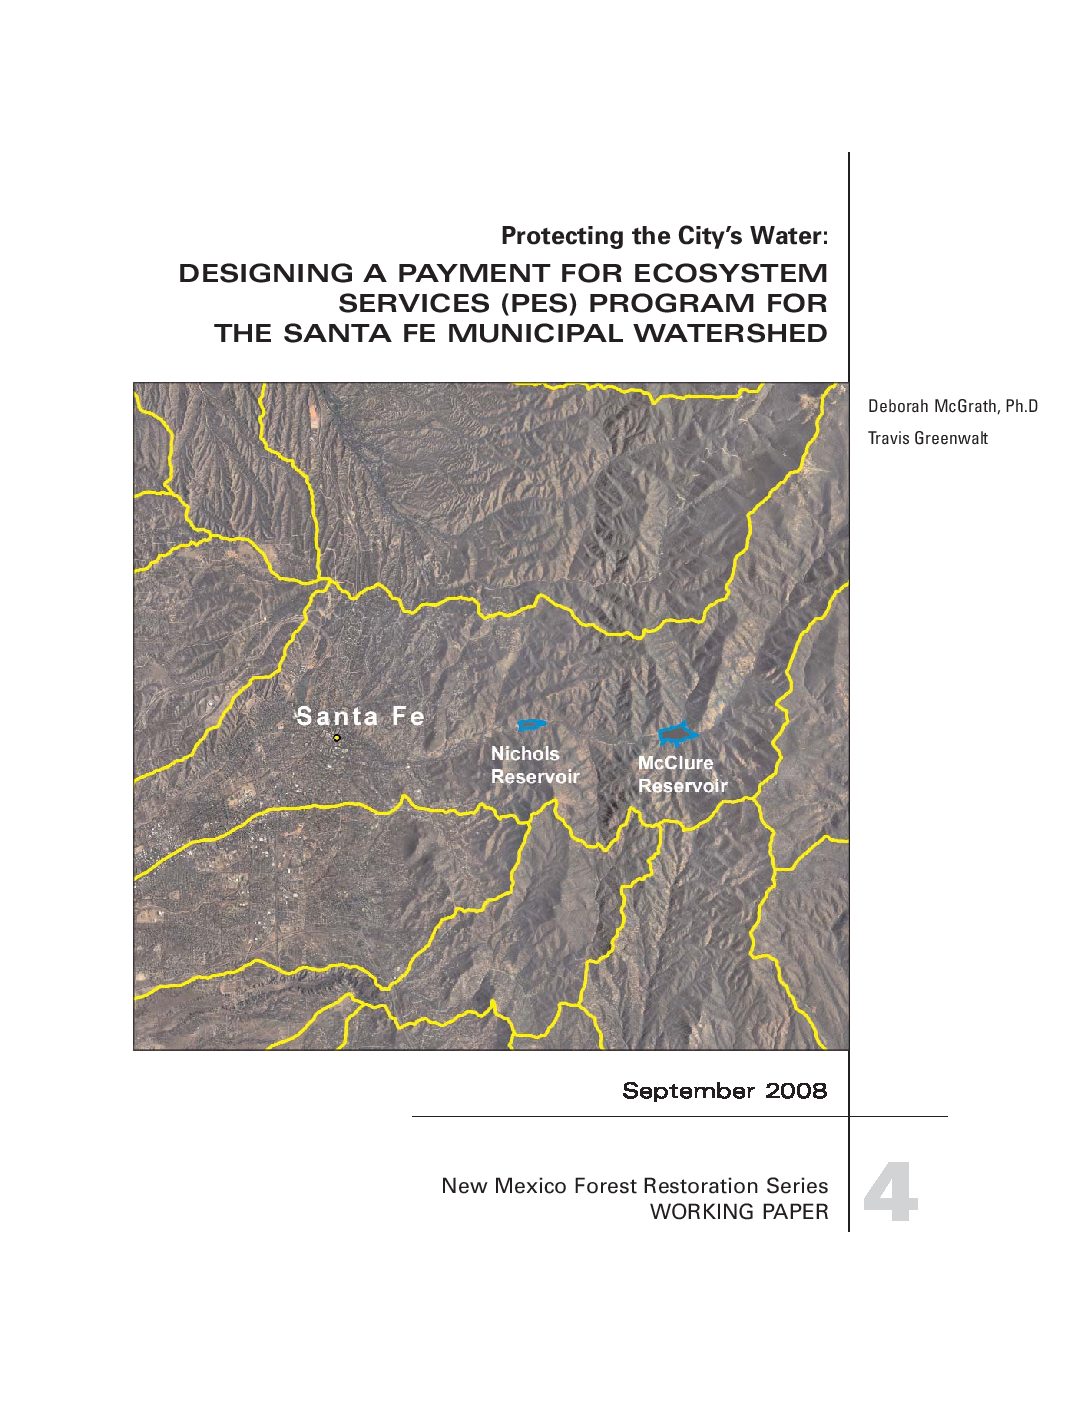 Protecting The City’s Water: Designing A Payment for Ecosystem Services (Pes) Program for The Santa Fe Municipal Watershed